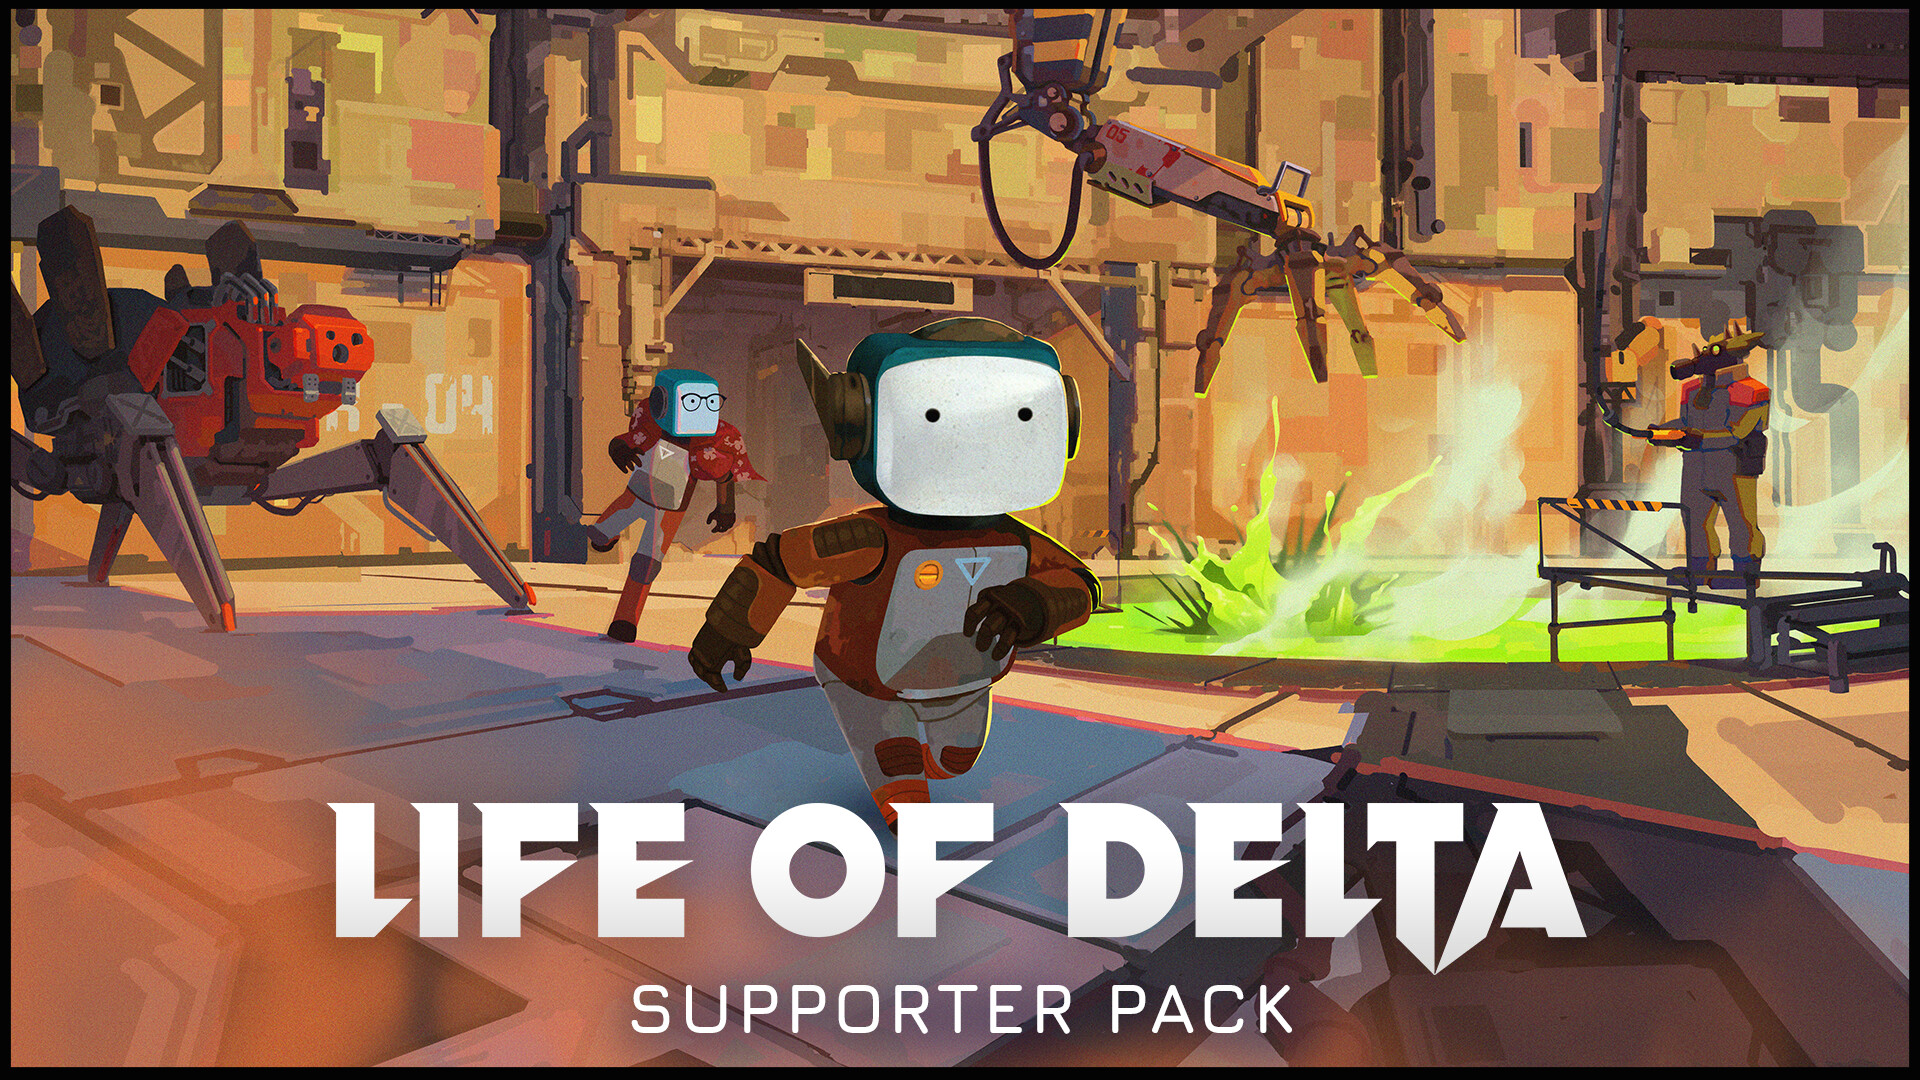 Life of Delta - Support Adventures! Pack Featured Screenshot #1